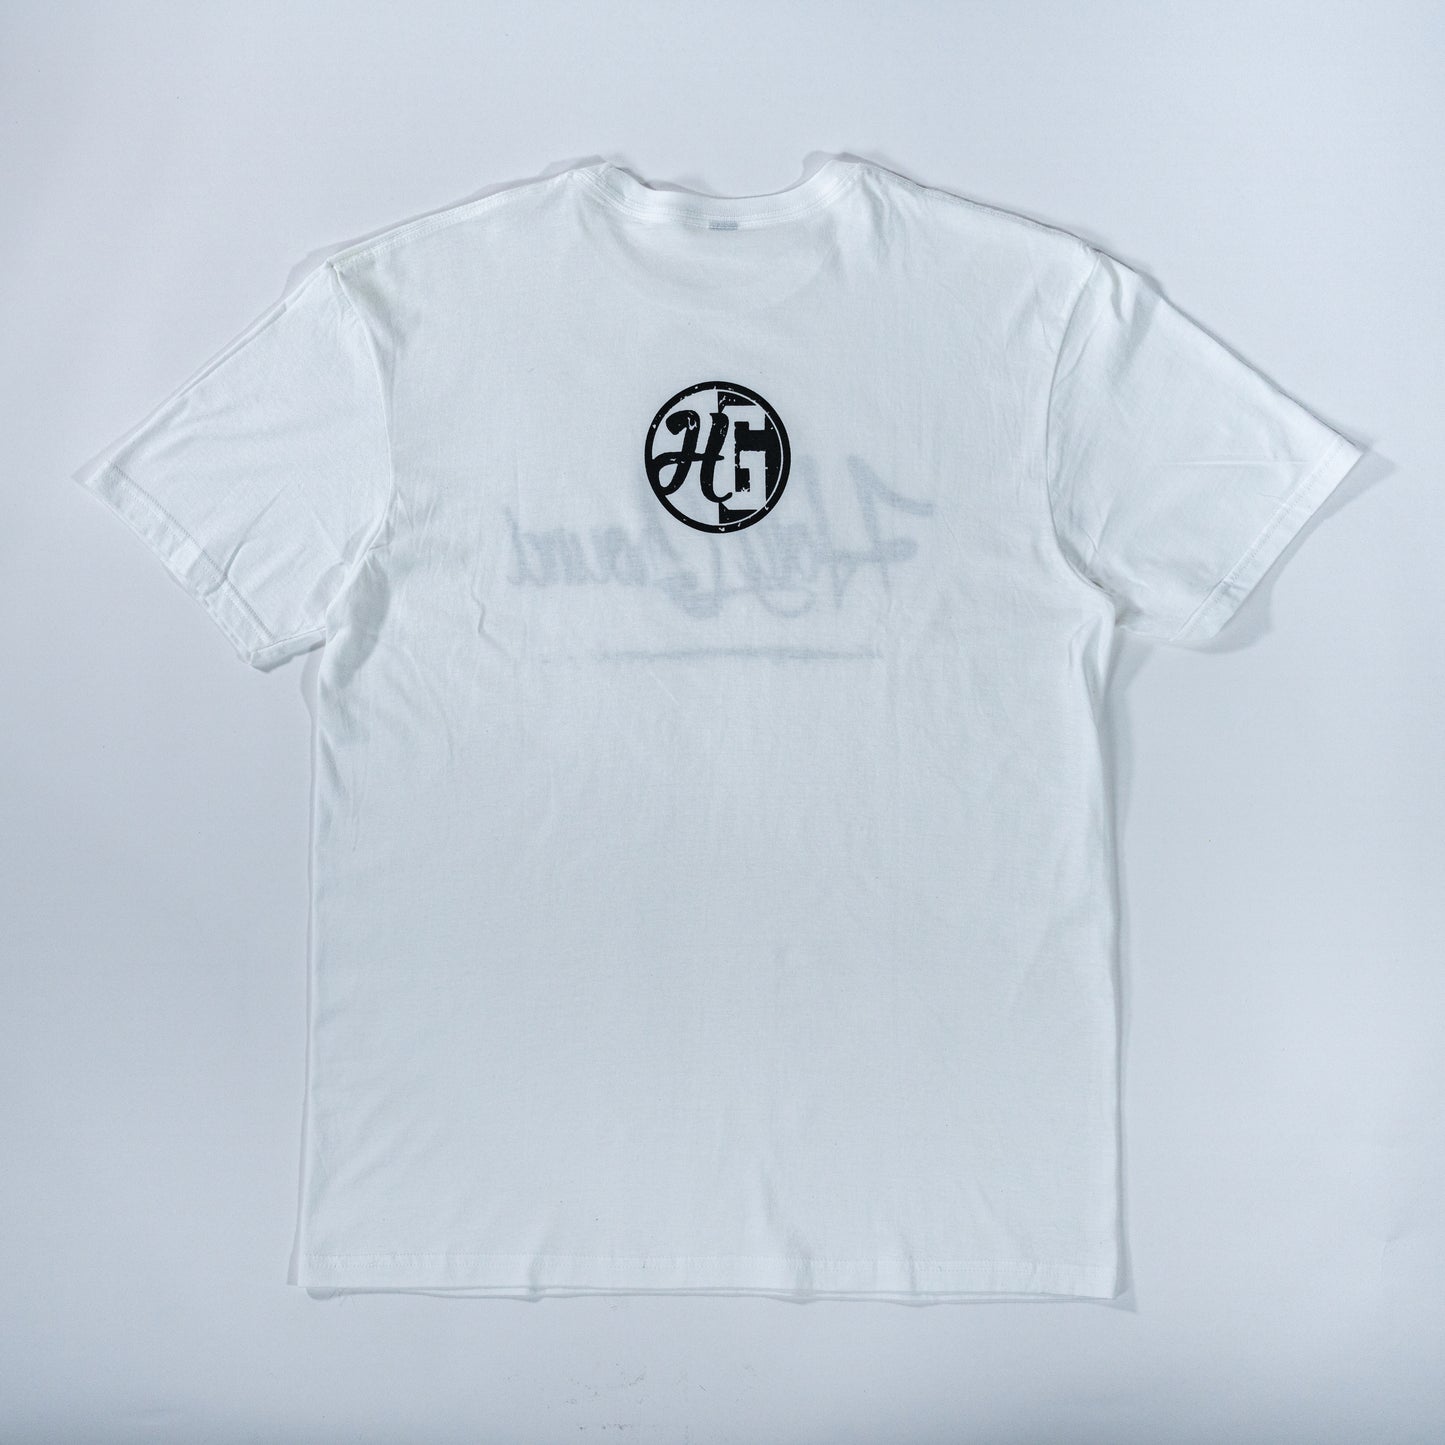 White short sleeve T-shirt with black lettering